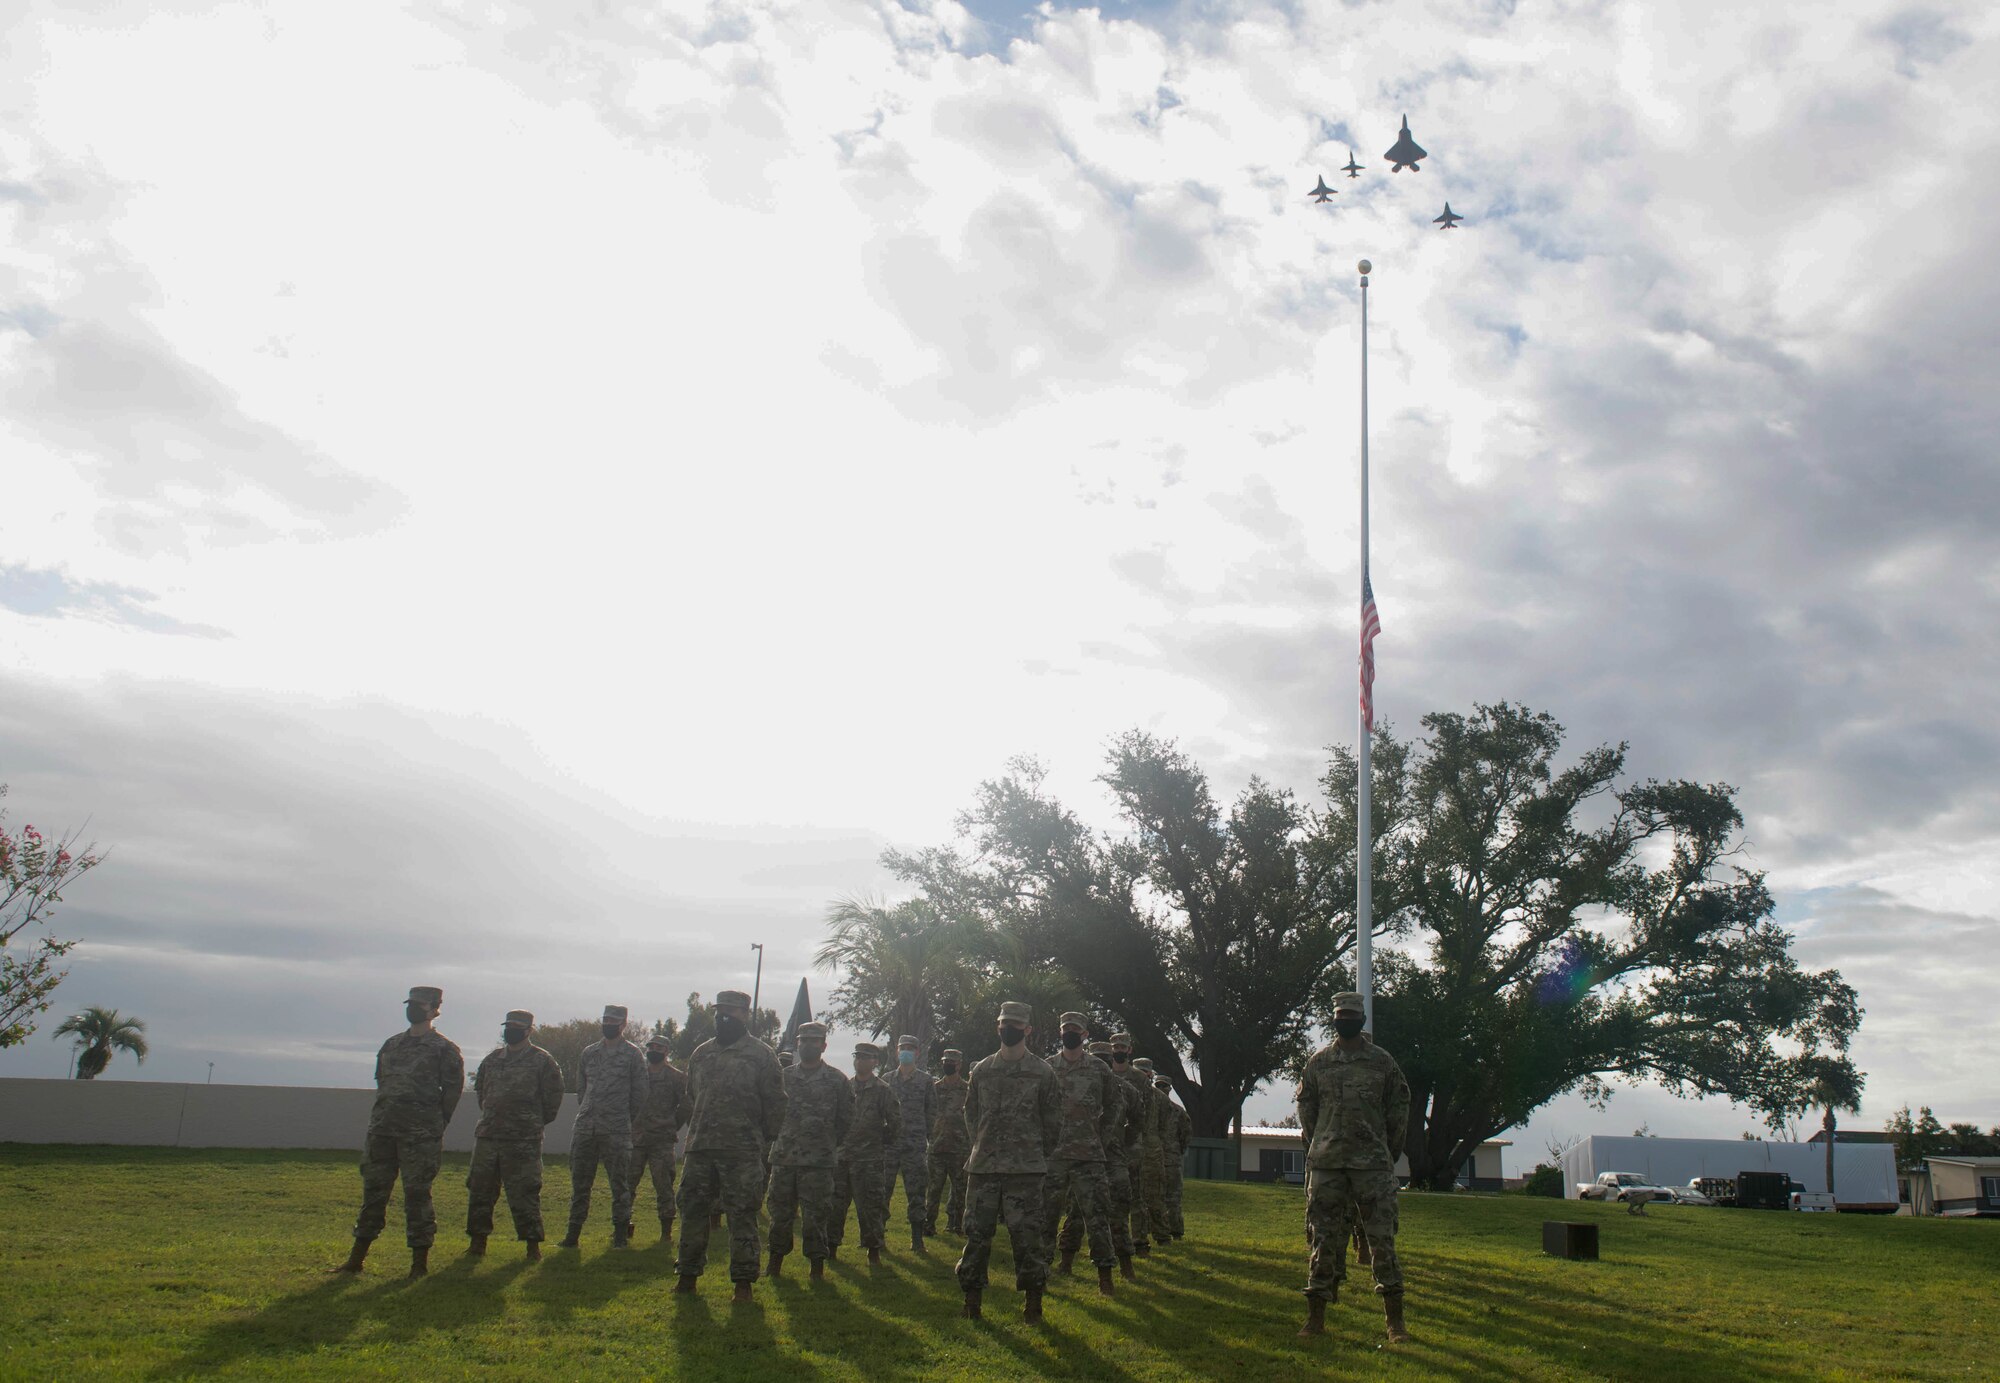 U.S. Airmen with the 81st Air Control Squadron stand in formation at Flag Park at Tyndall Air Force Base, Florida, Sept. 24, 2020. The 43rd Fighter Squadron lead the team Tyndall flyover in support of the POW/MIA vigil run coordinated by the 81st ACS. (U.S. Air Force photo by Airman Anabel Del Valle)